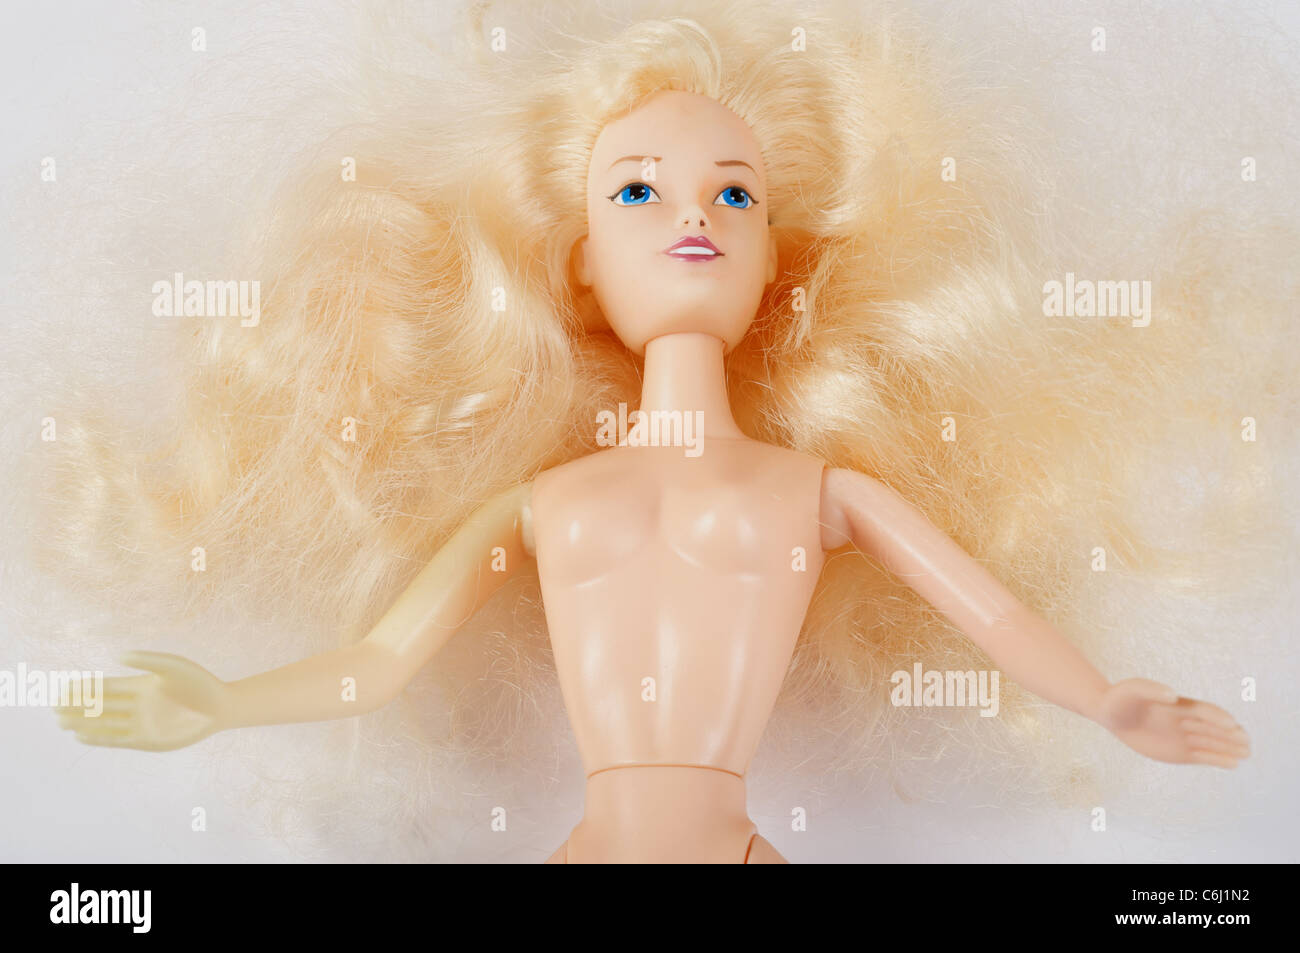 Barbie' lookalike toy doll made in China by Simba toys Stock Photo - Alamy